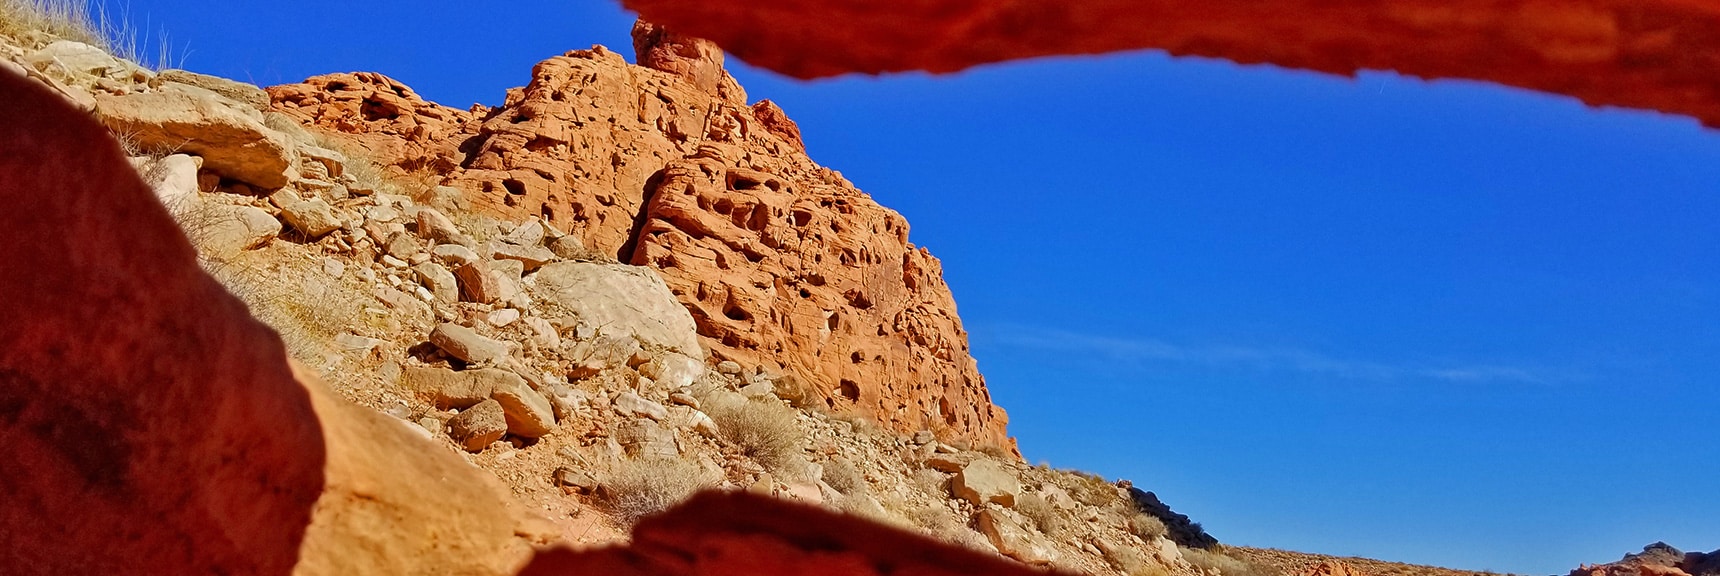 Intricate Openings in Jurassic Era Aztec Red Rock | Bowl of Fire, Lake Mead National Recreation Area, Nevada